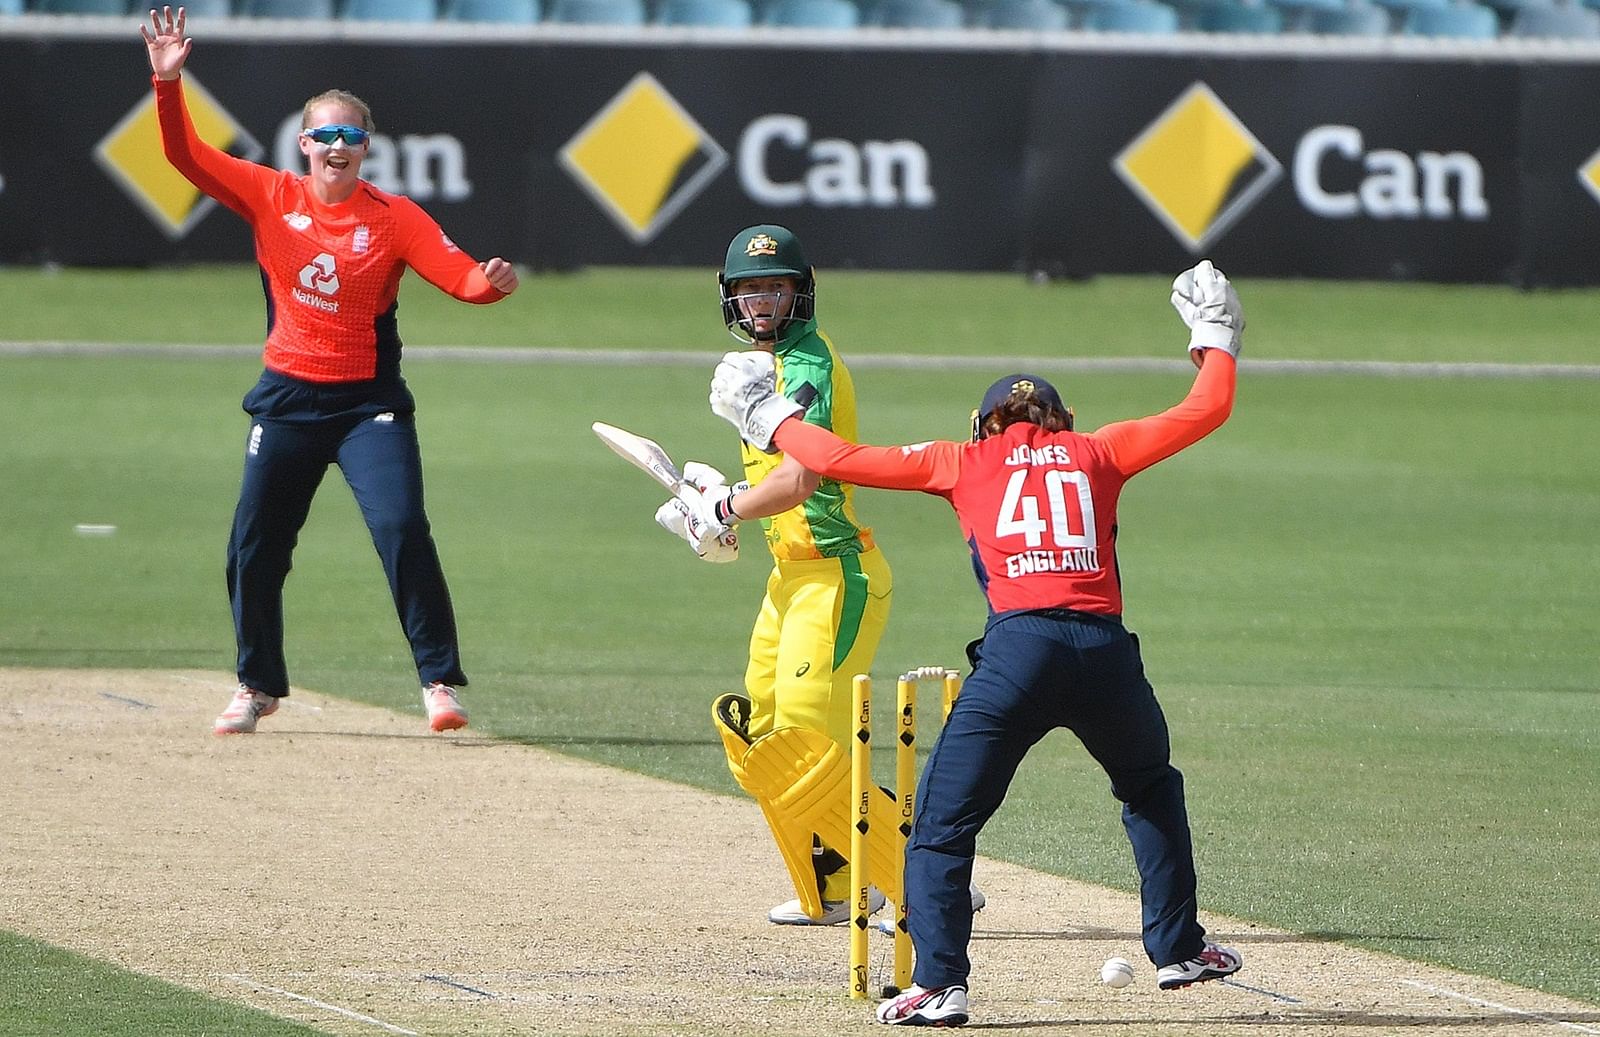 Women’s cricket will be a part of the Commonwealth Games for the first time ever.